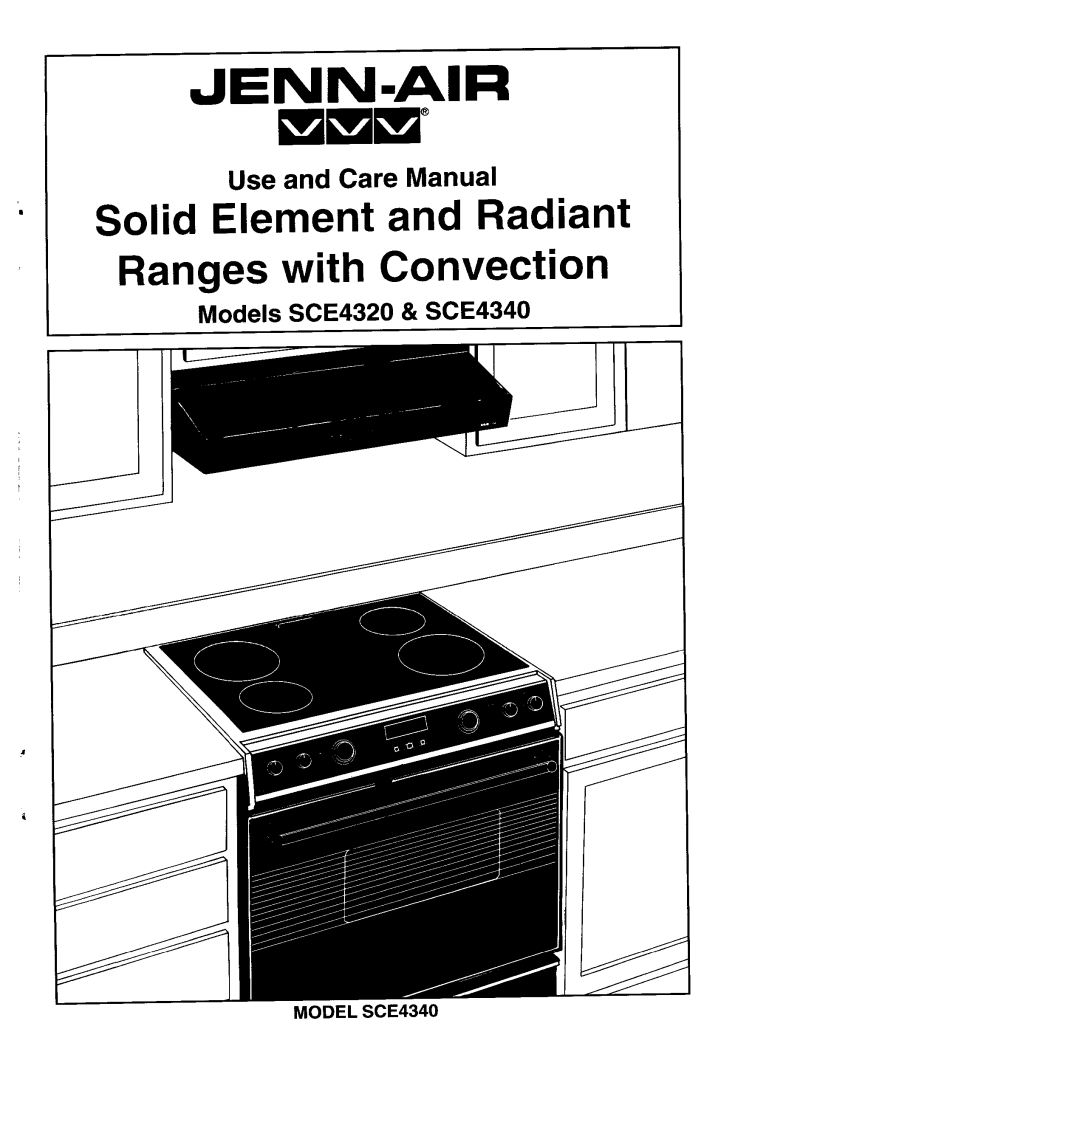 Jenn-Air SCE4340, SCE4320 manual Jenn-Air, Solid Element and Radiant Ranges with Convection, Use and Care Manual 